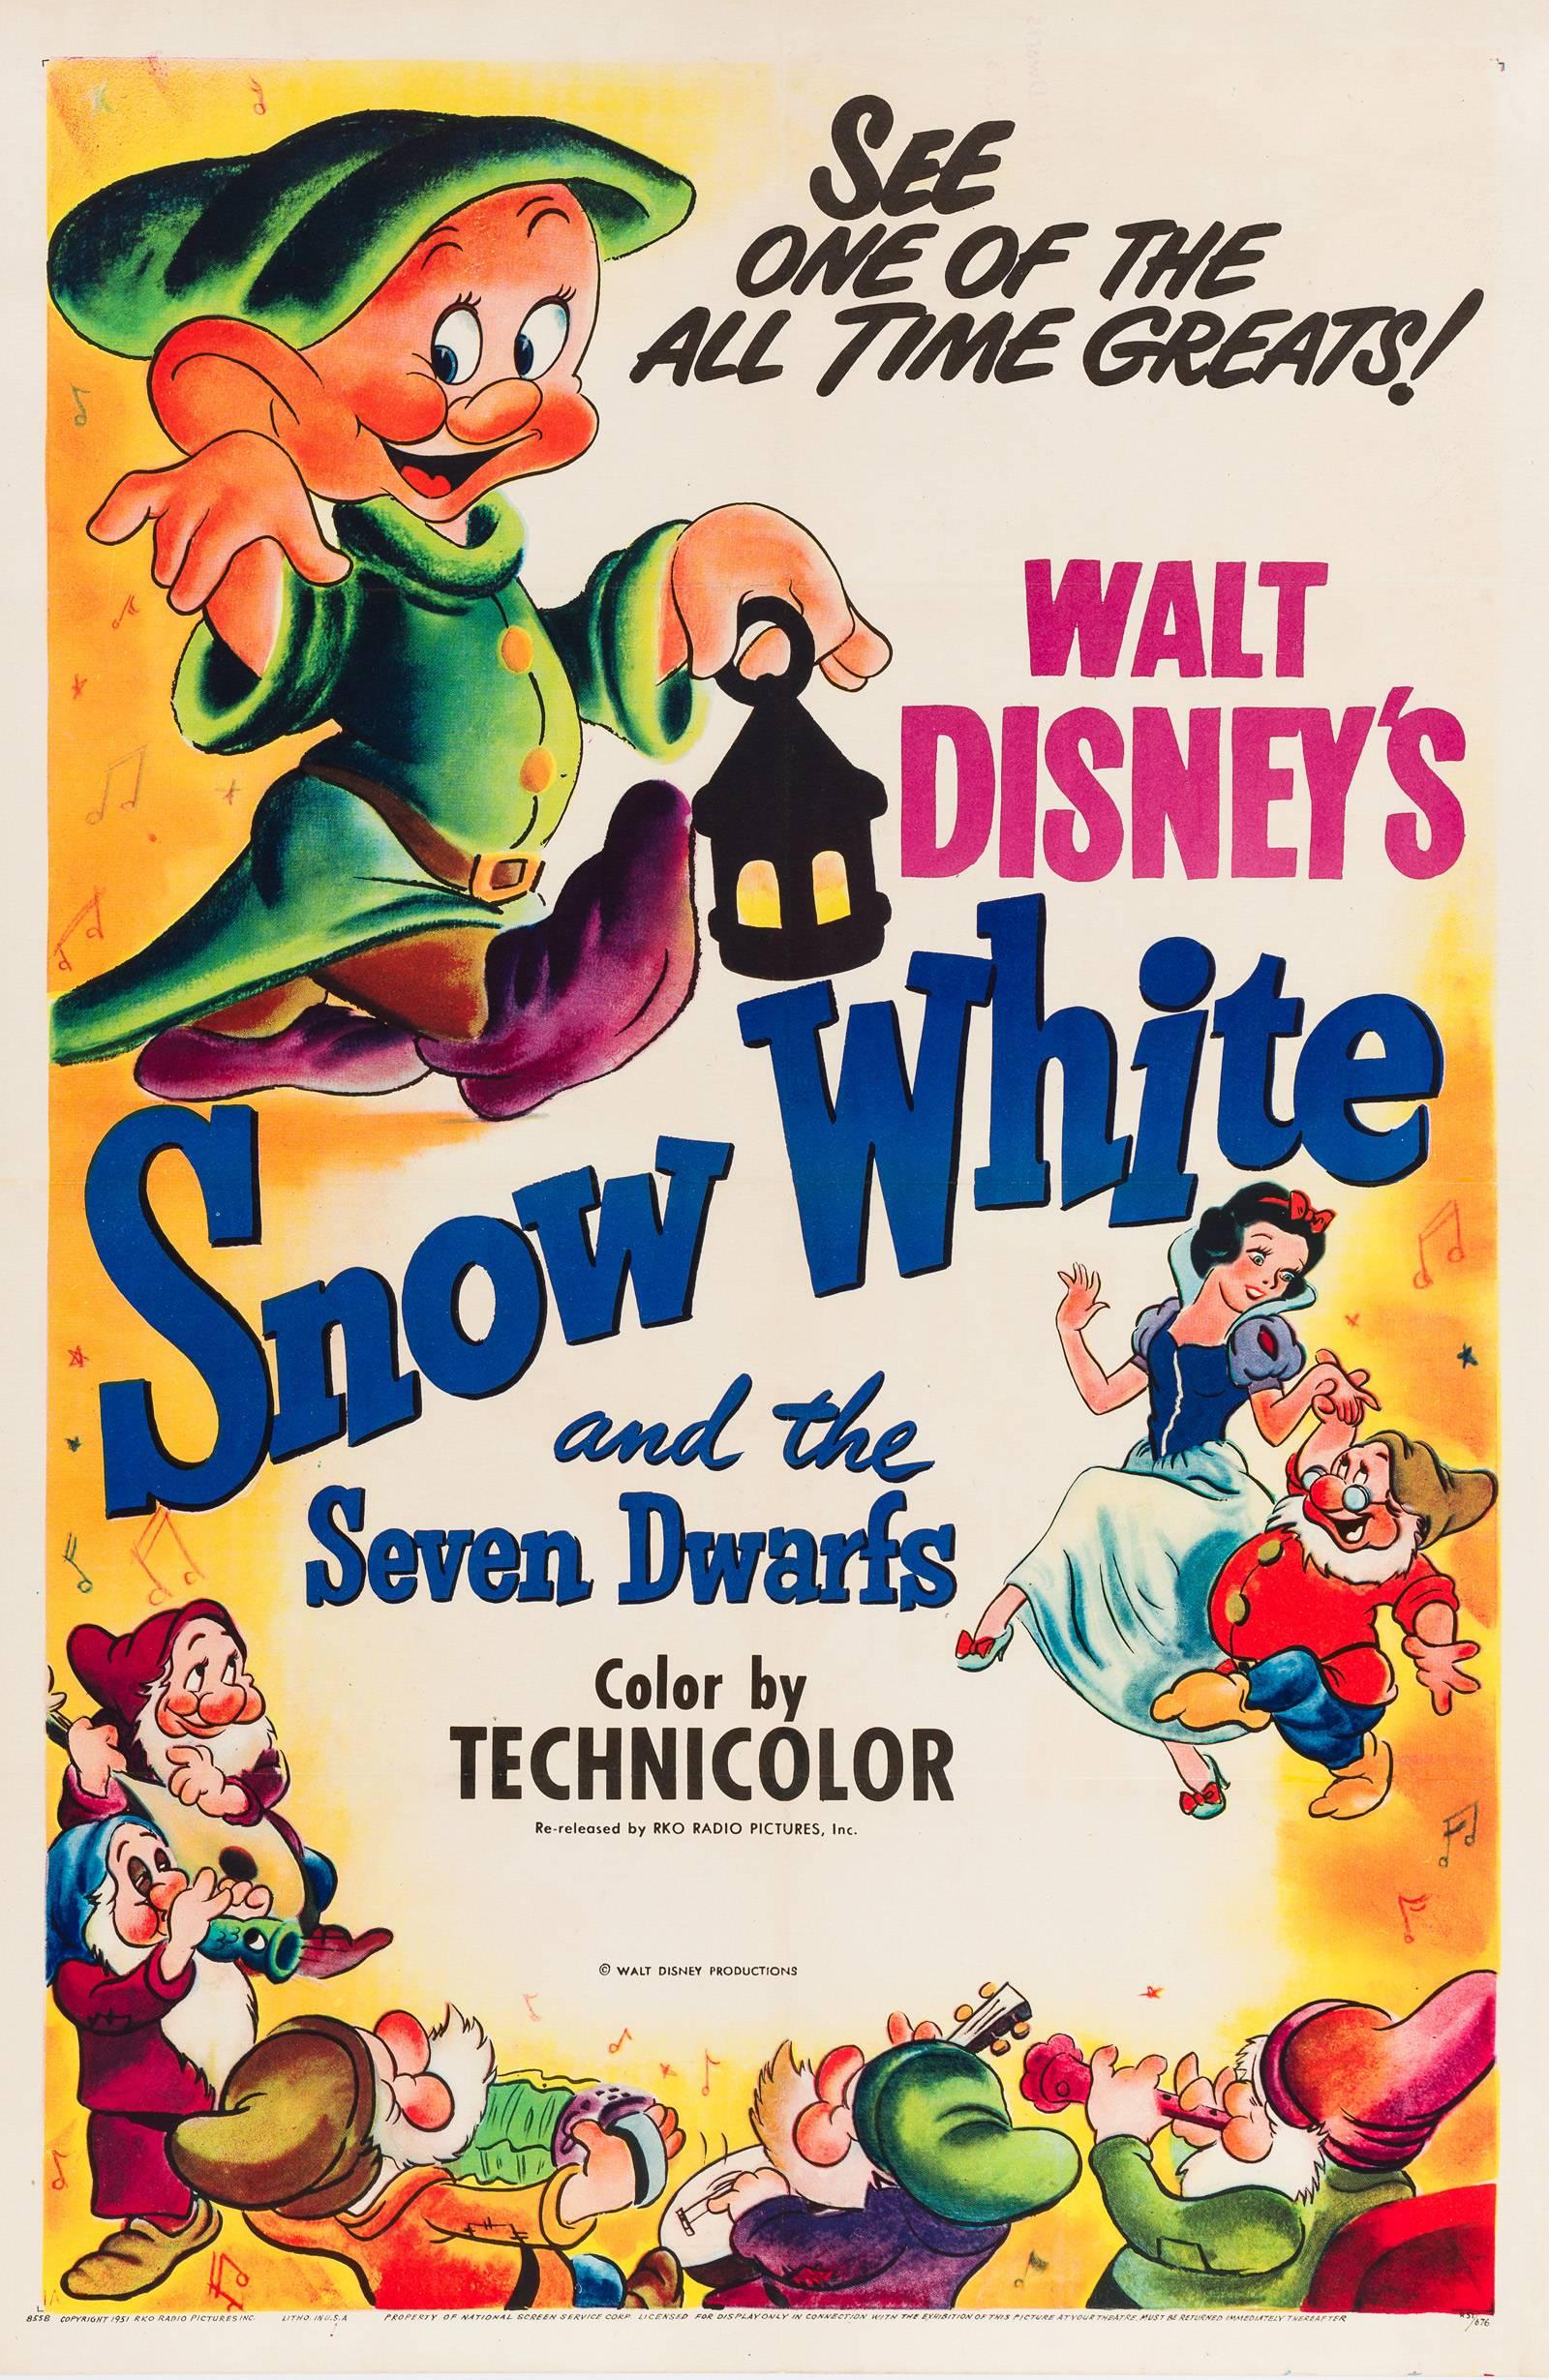 The 1951 country-of-origin re-release poster for snow white has some of the best artwork for the title, with everyone’s favourite dwarf Dopey featuring prominently. Lovely deep rich colours, another classic Disney poster that shouldn’t be confined